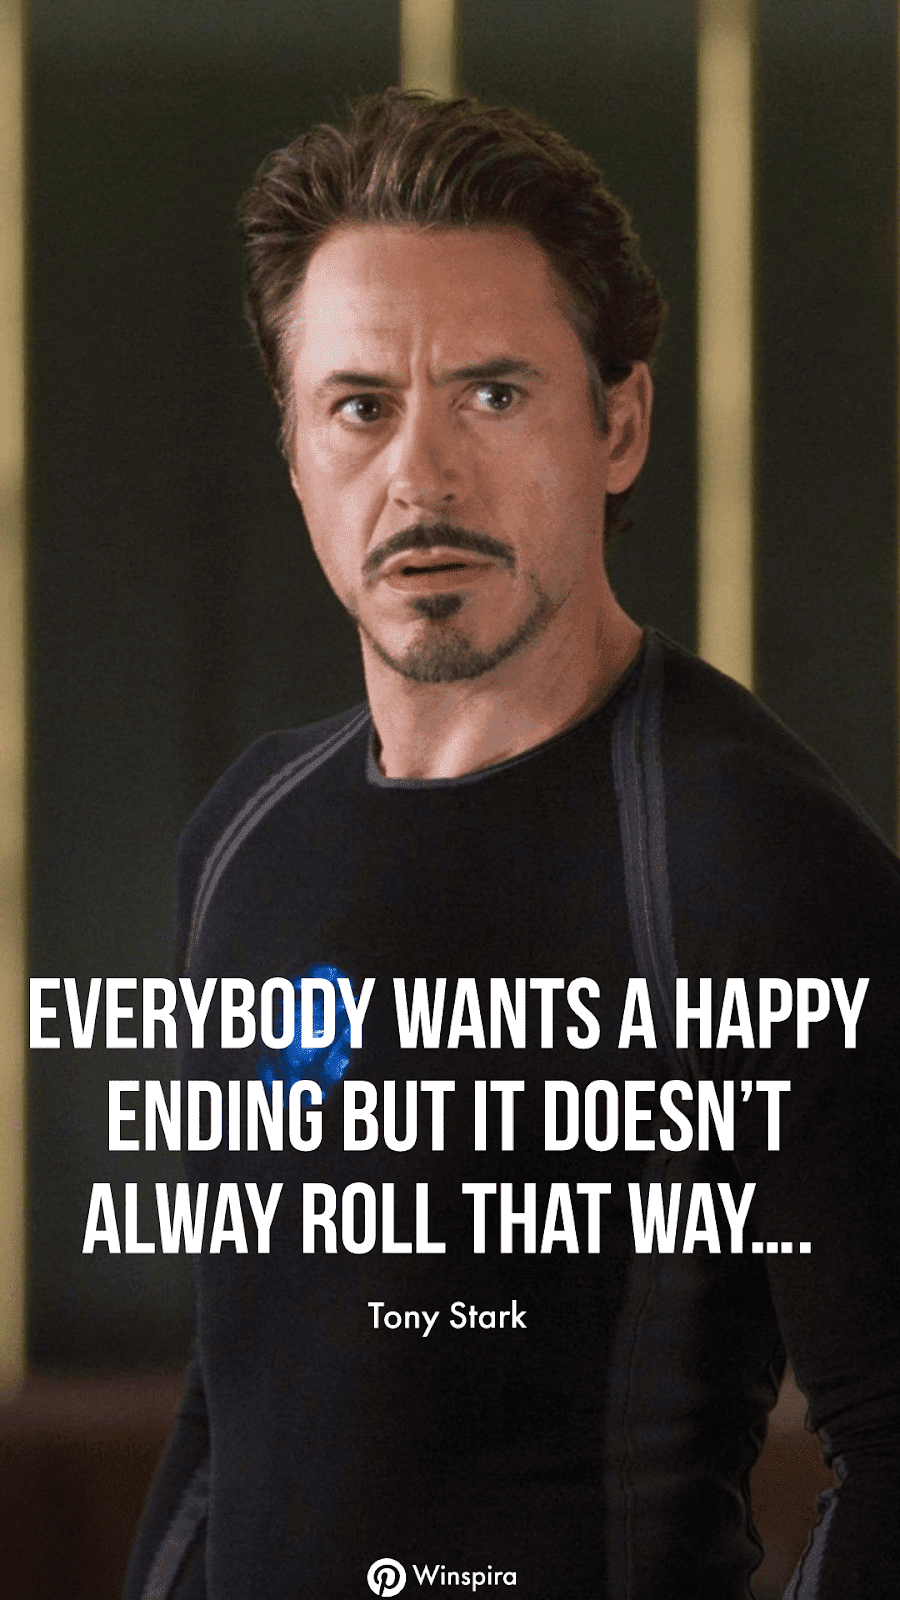 Marvel released avengers endgame last week and I'm proud to say that Endgame is smashing all the previous box offic. Tony stark quotes, Stark quote, Marvel quotes